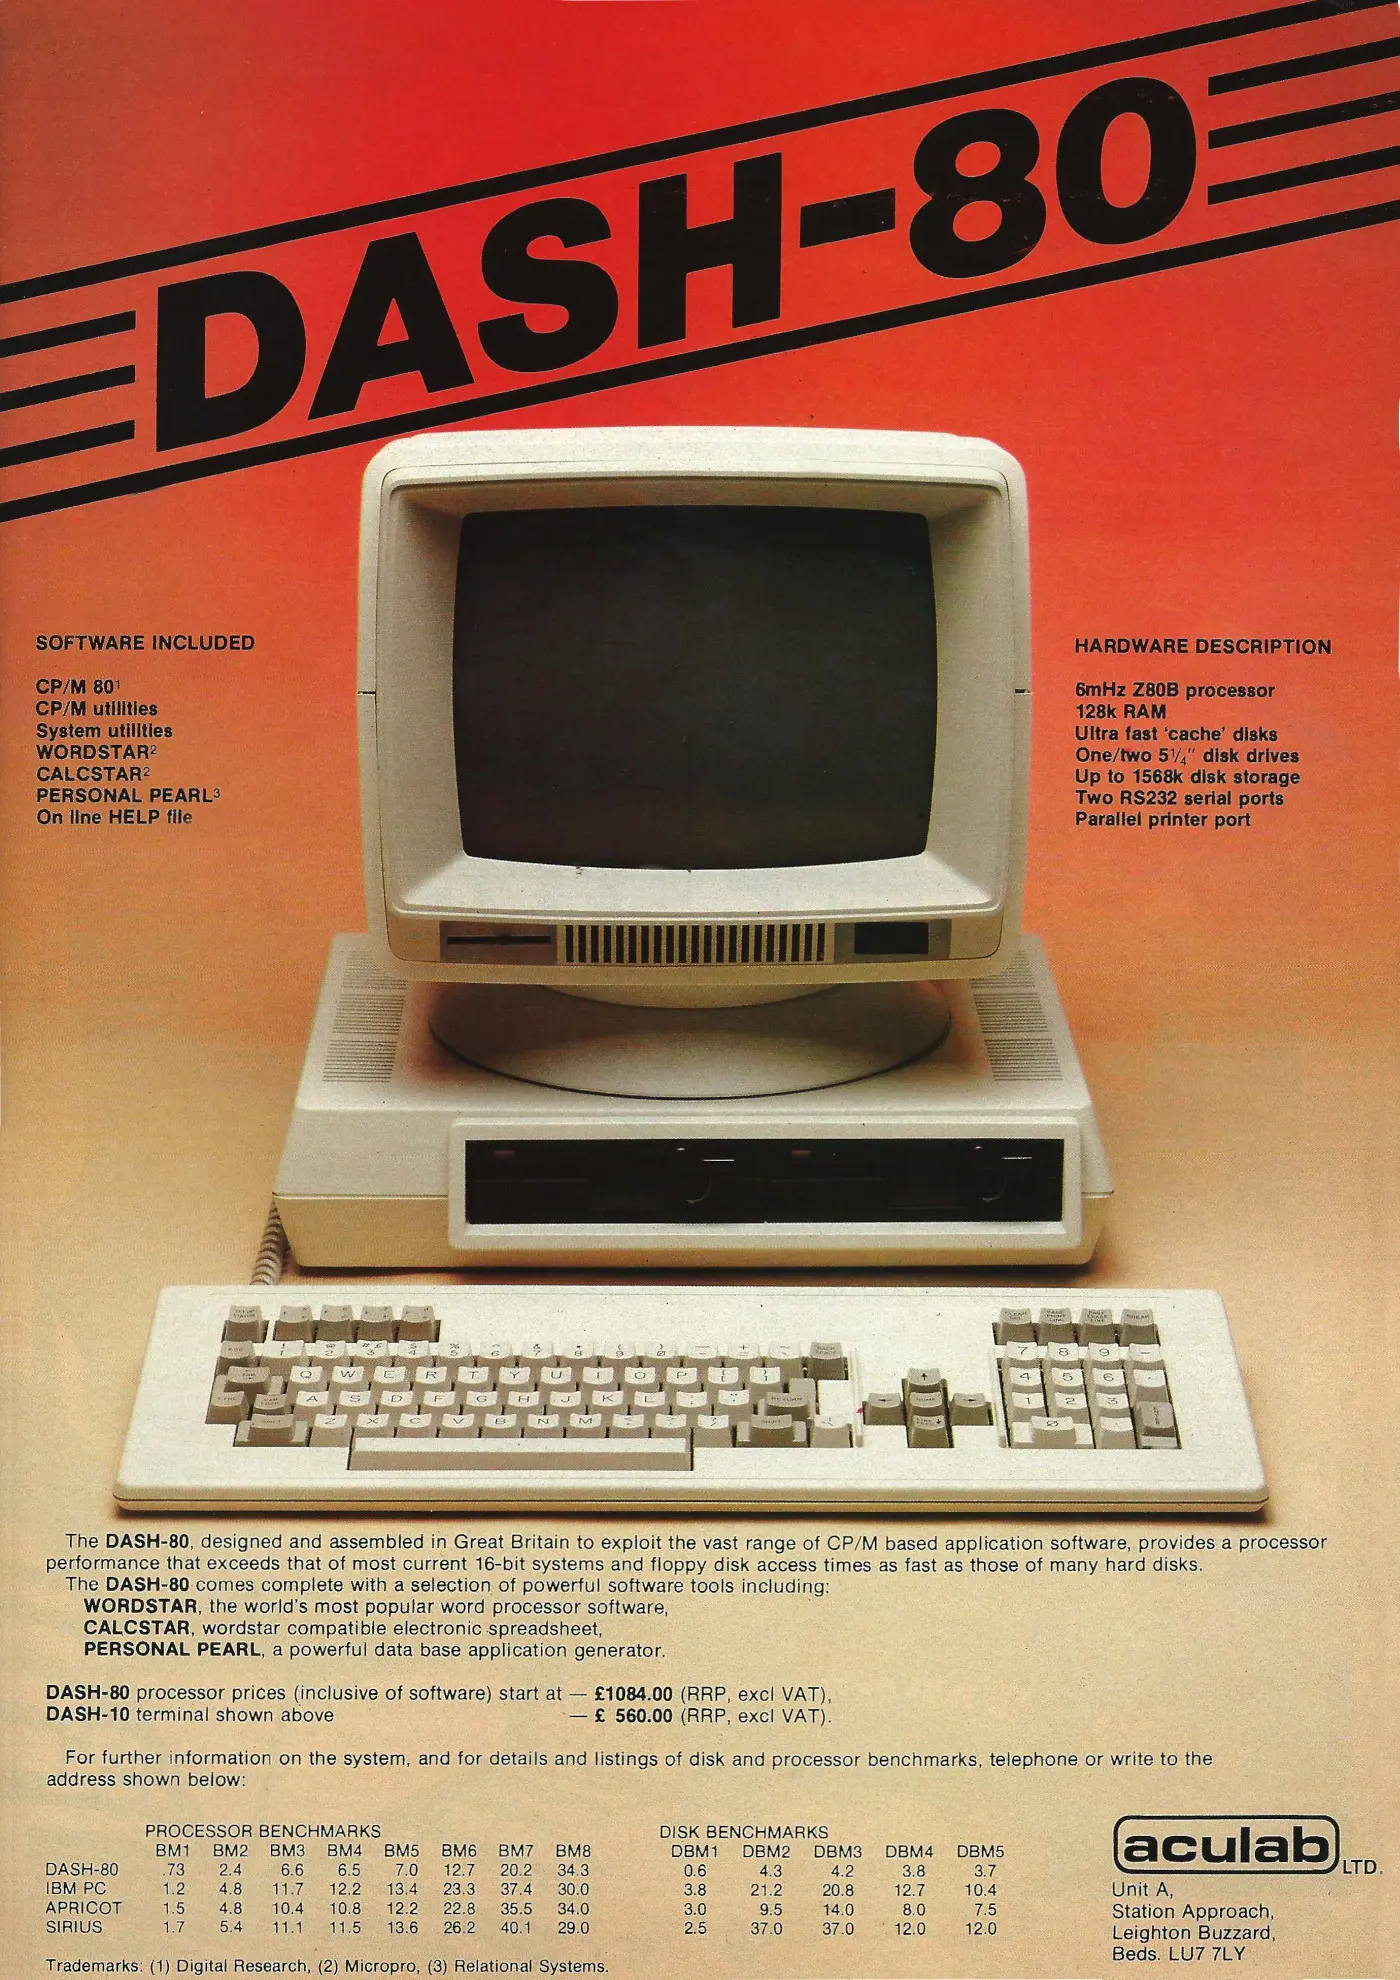 Aculab Advert: The DASH-80, designed and assembled in Great Britain, from Personal Computer World, August 1984